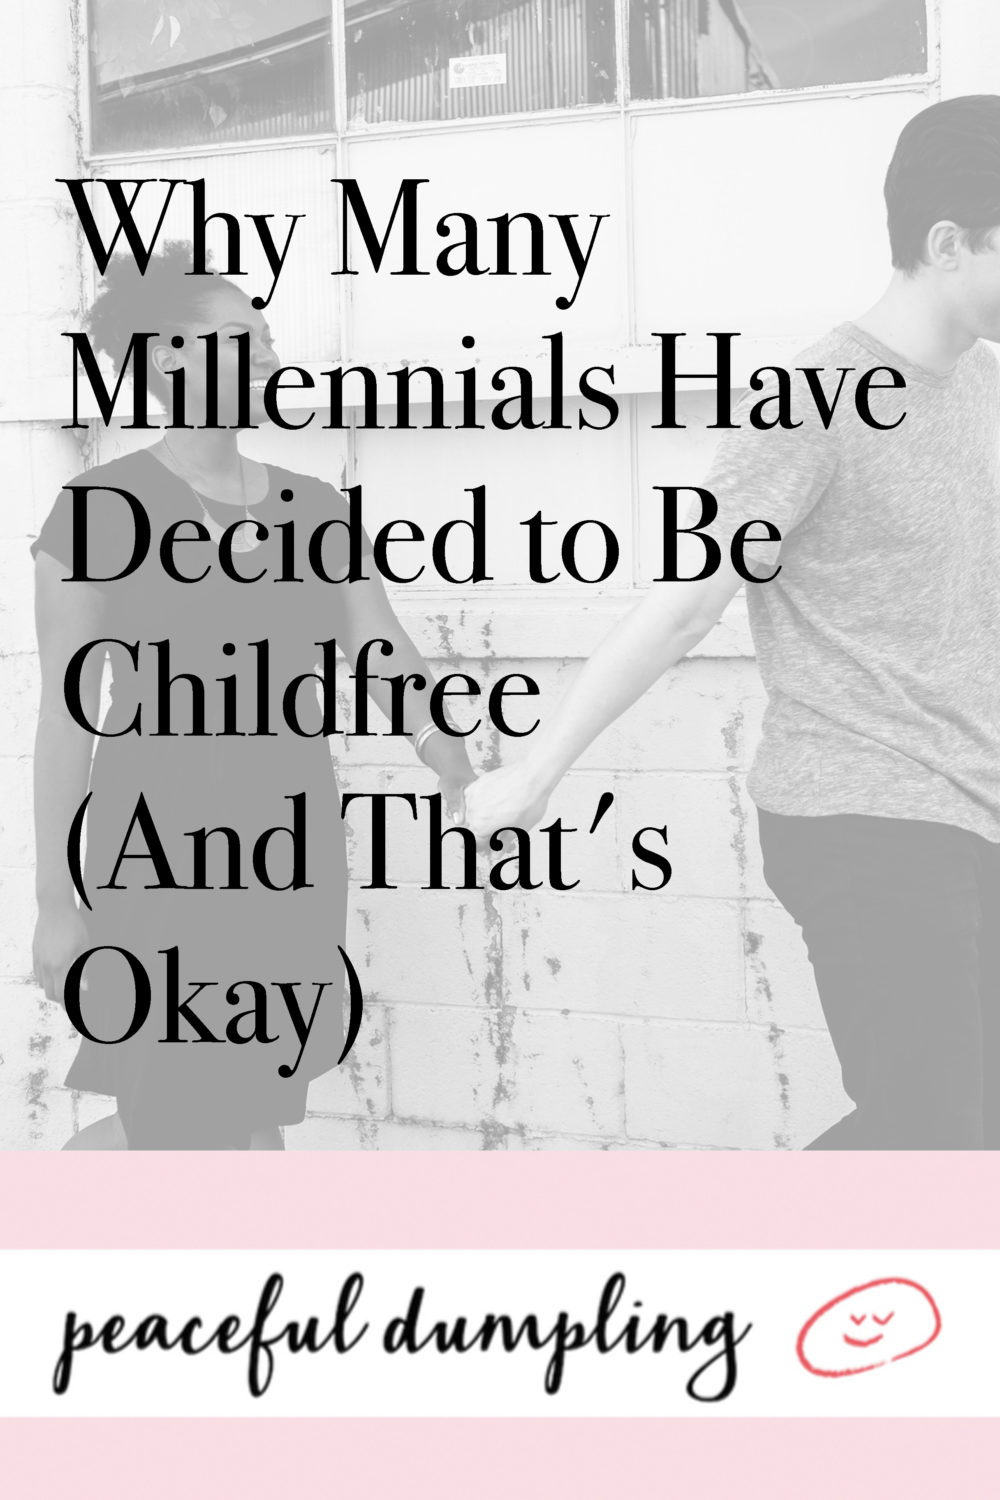 Why Many Millennials Have Decided to Be Childfree (And That's Okay)